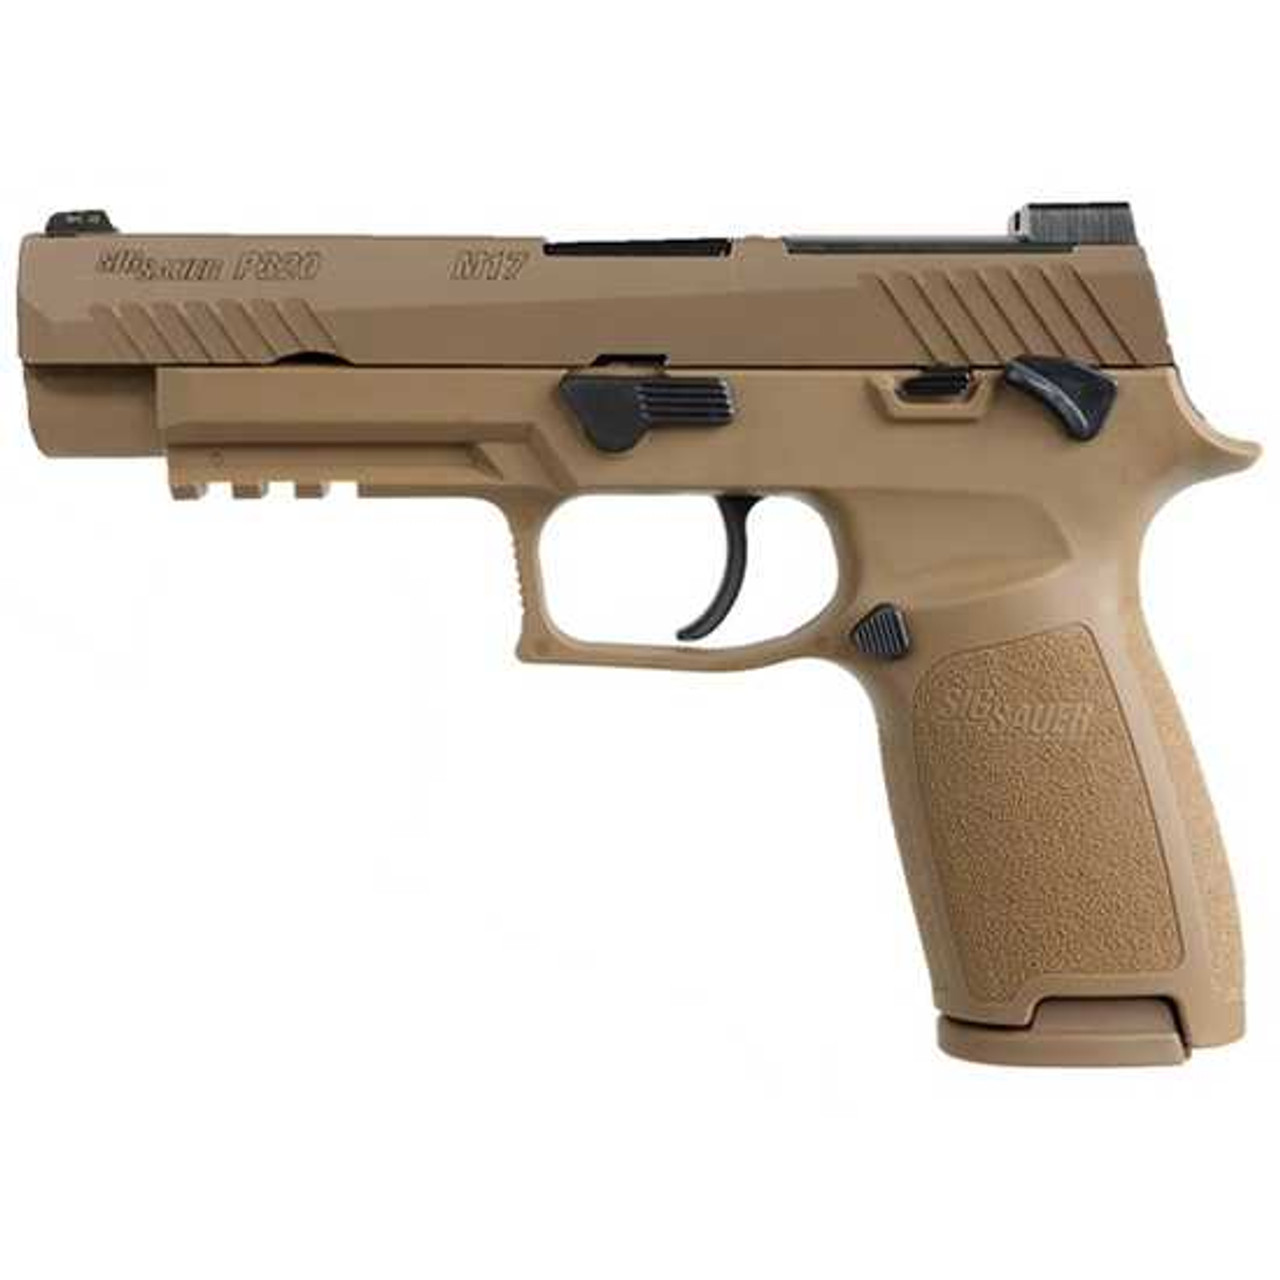 SIG P320 9MM 4.7 M17 SAFETY COYOTE 10RD